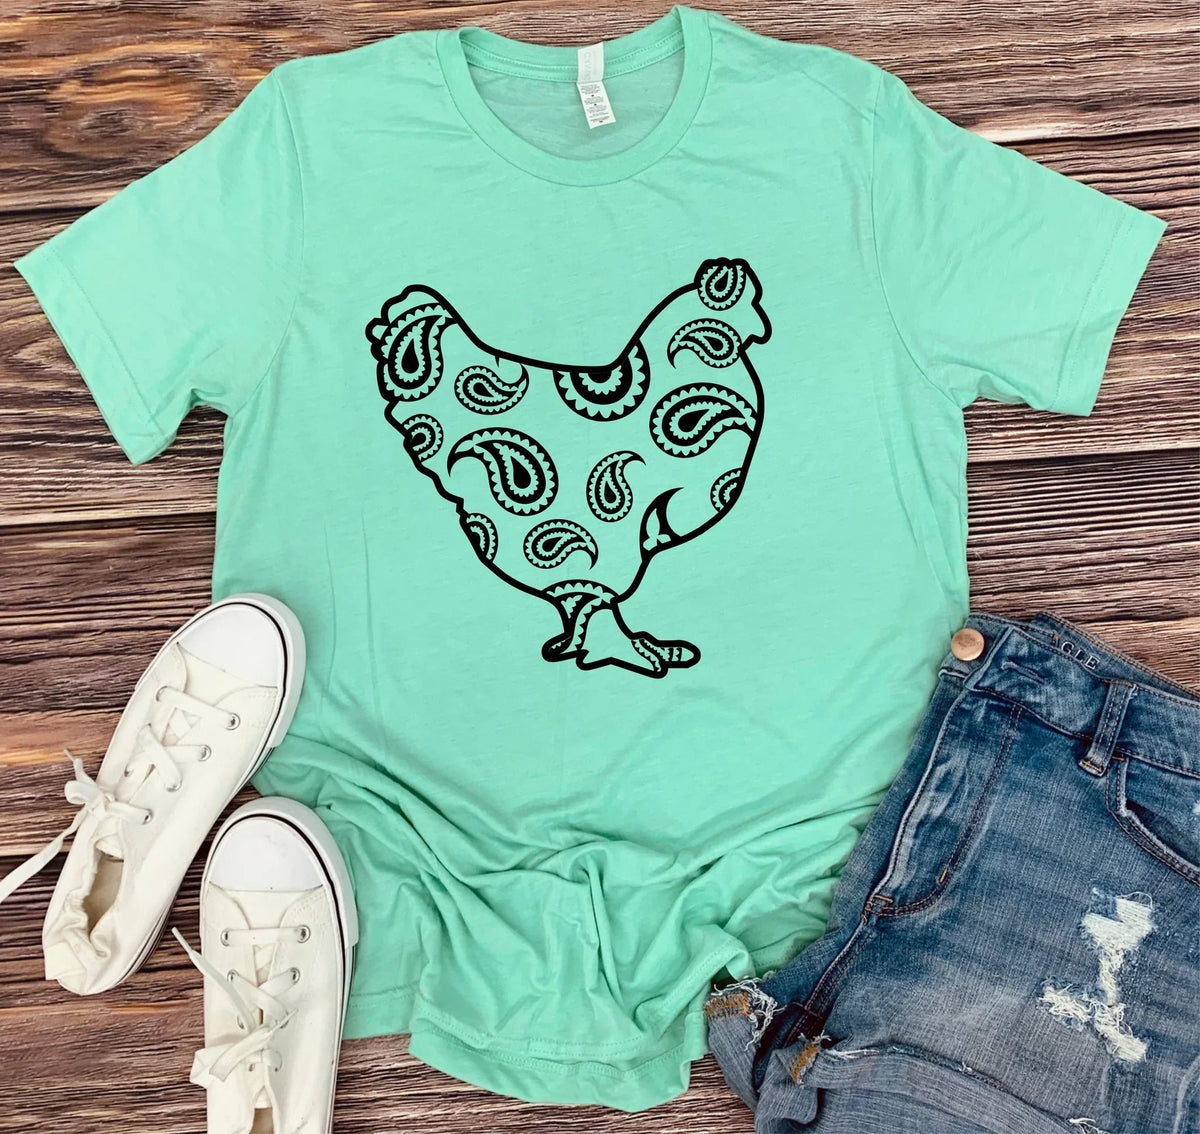 Paisley Chicken Graphic Tees~4 color options